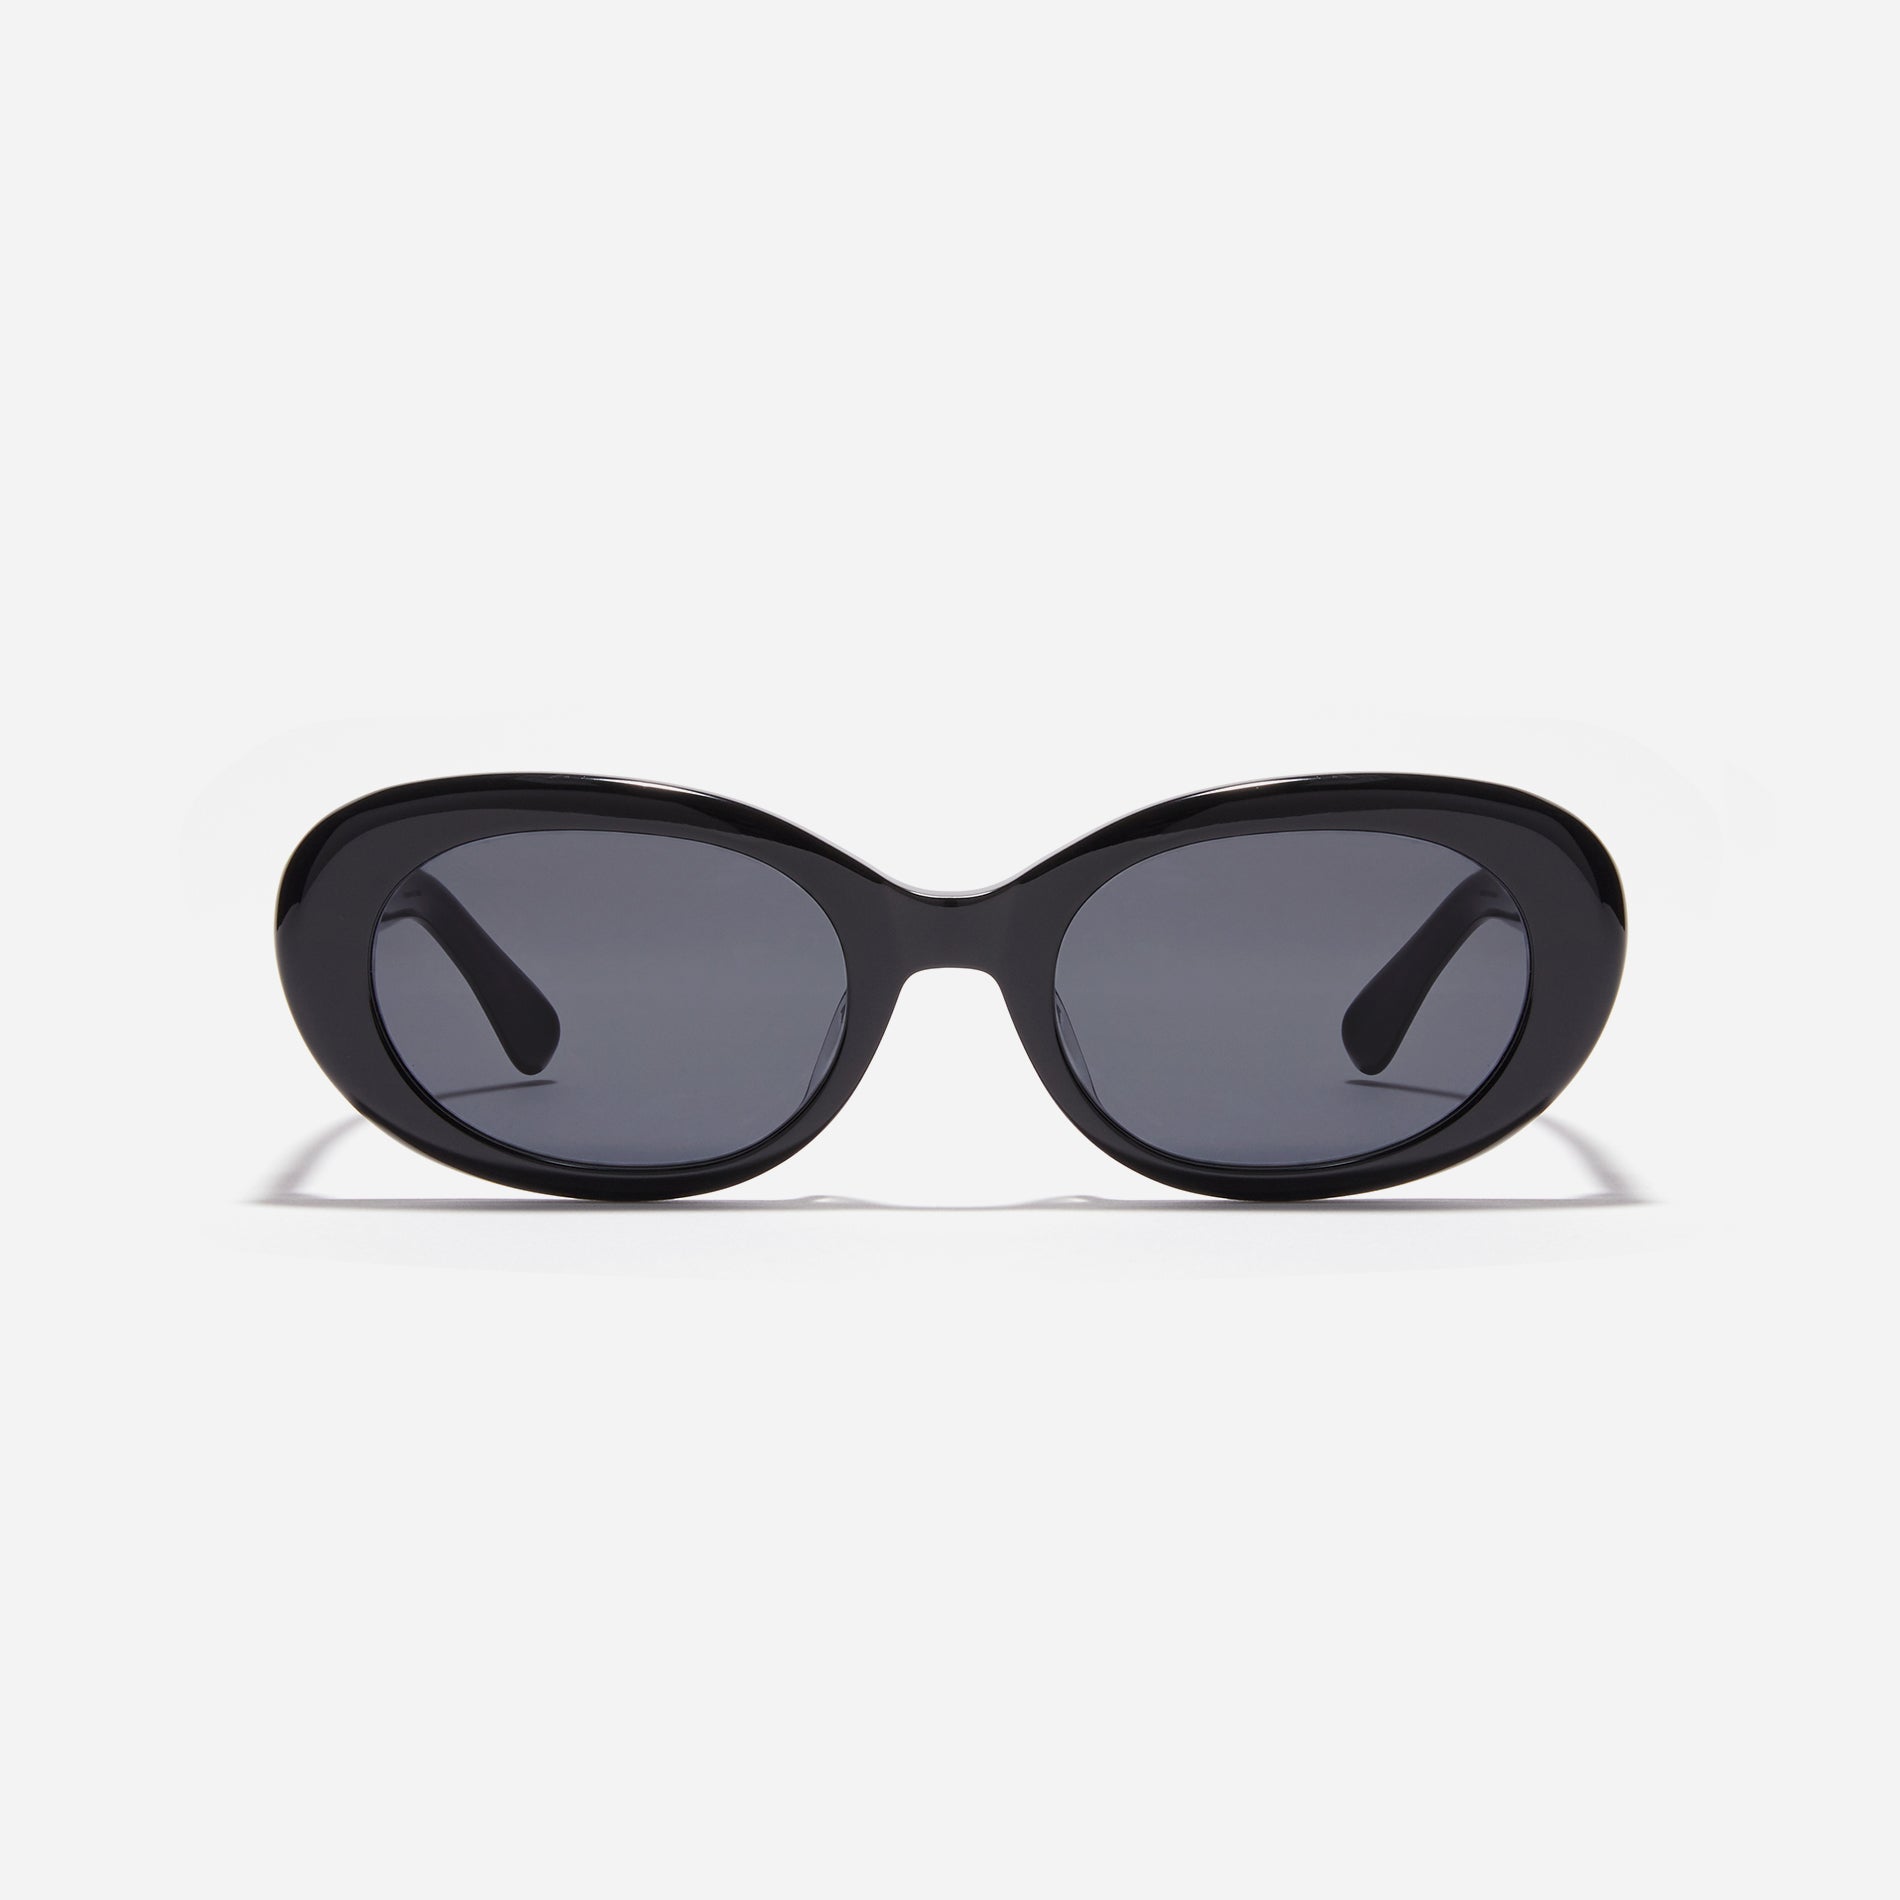  Born from the CARIN x OIOICOLLECTION collaboration, the CIRCLE sunglasses are designed with a sleek narrow rim style that gives a modern twist to the '90s retro vibe. The temples showcase a newly redesigned OIC logo emblem, highlighted by a soft color palette, adding a touch of fashion-forward style.